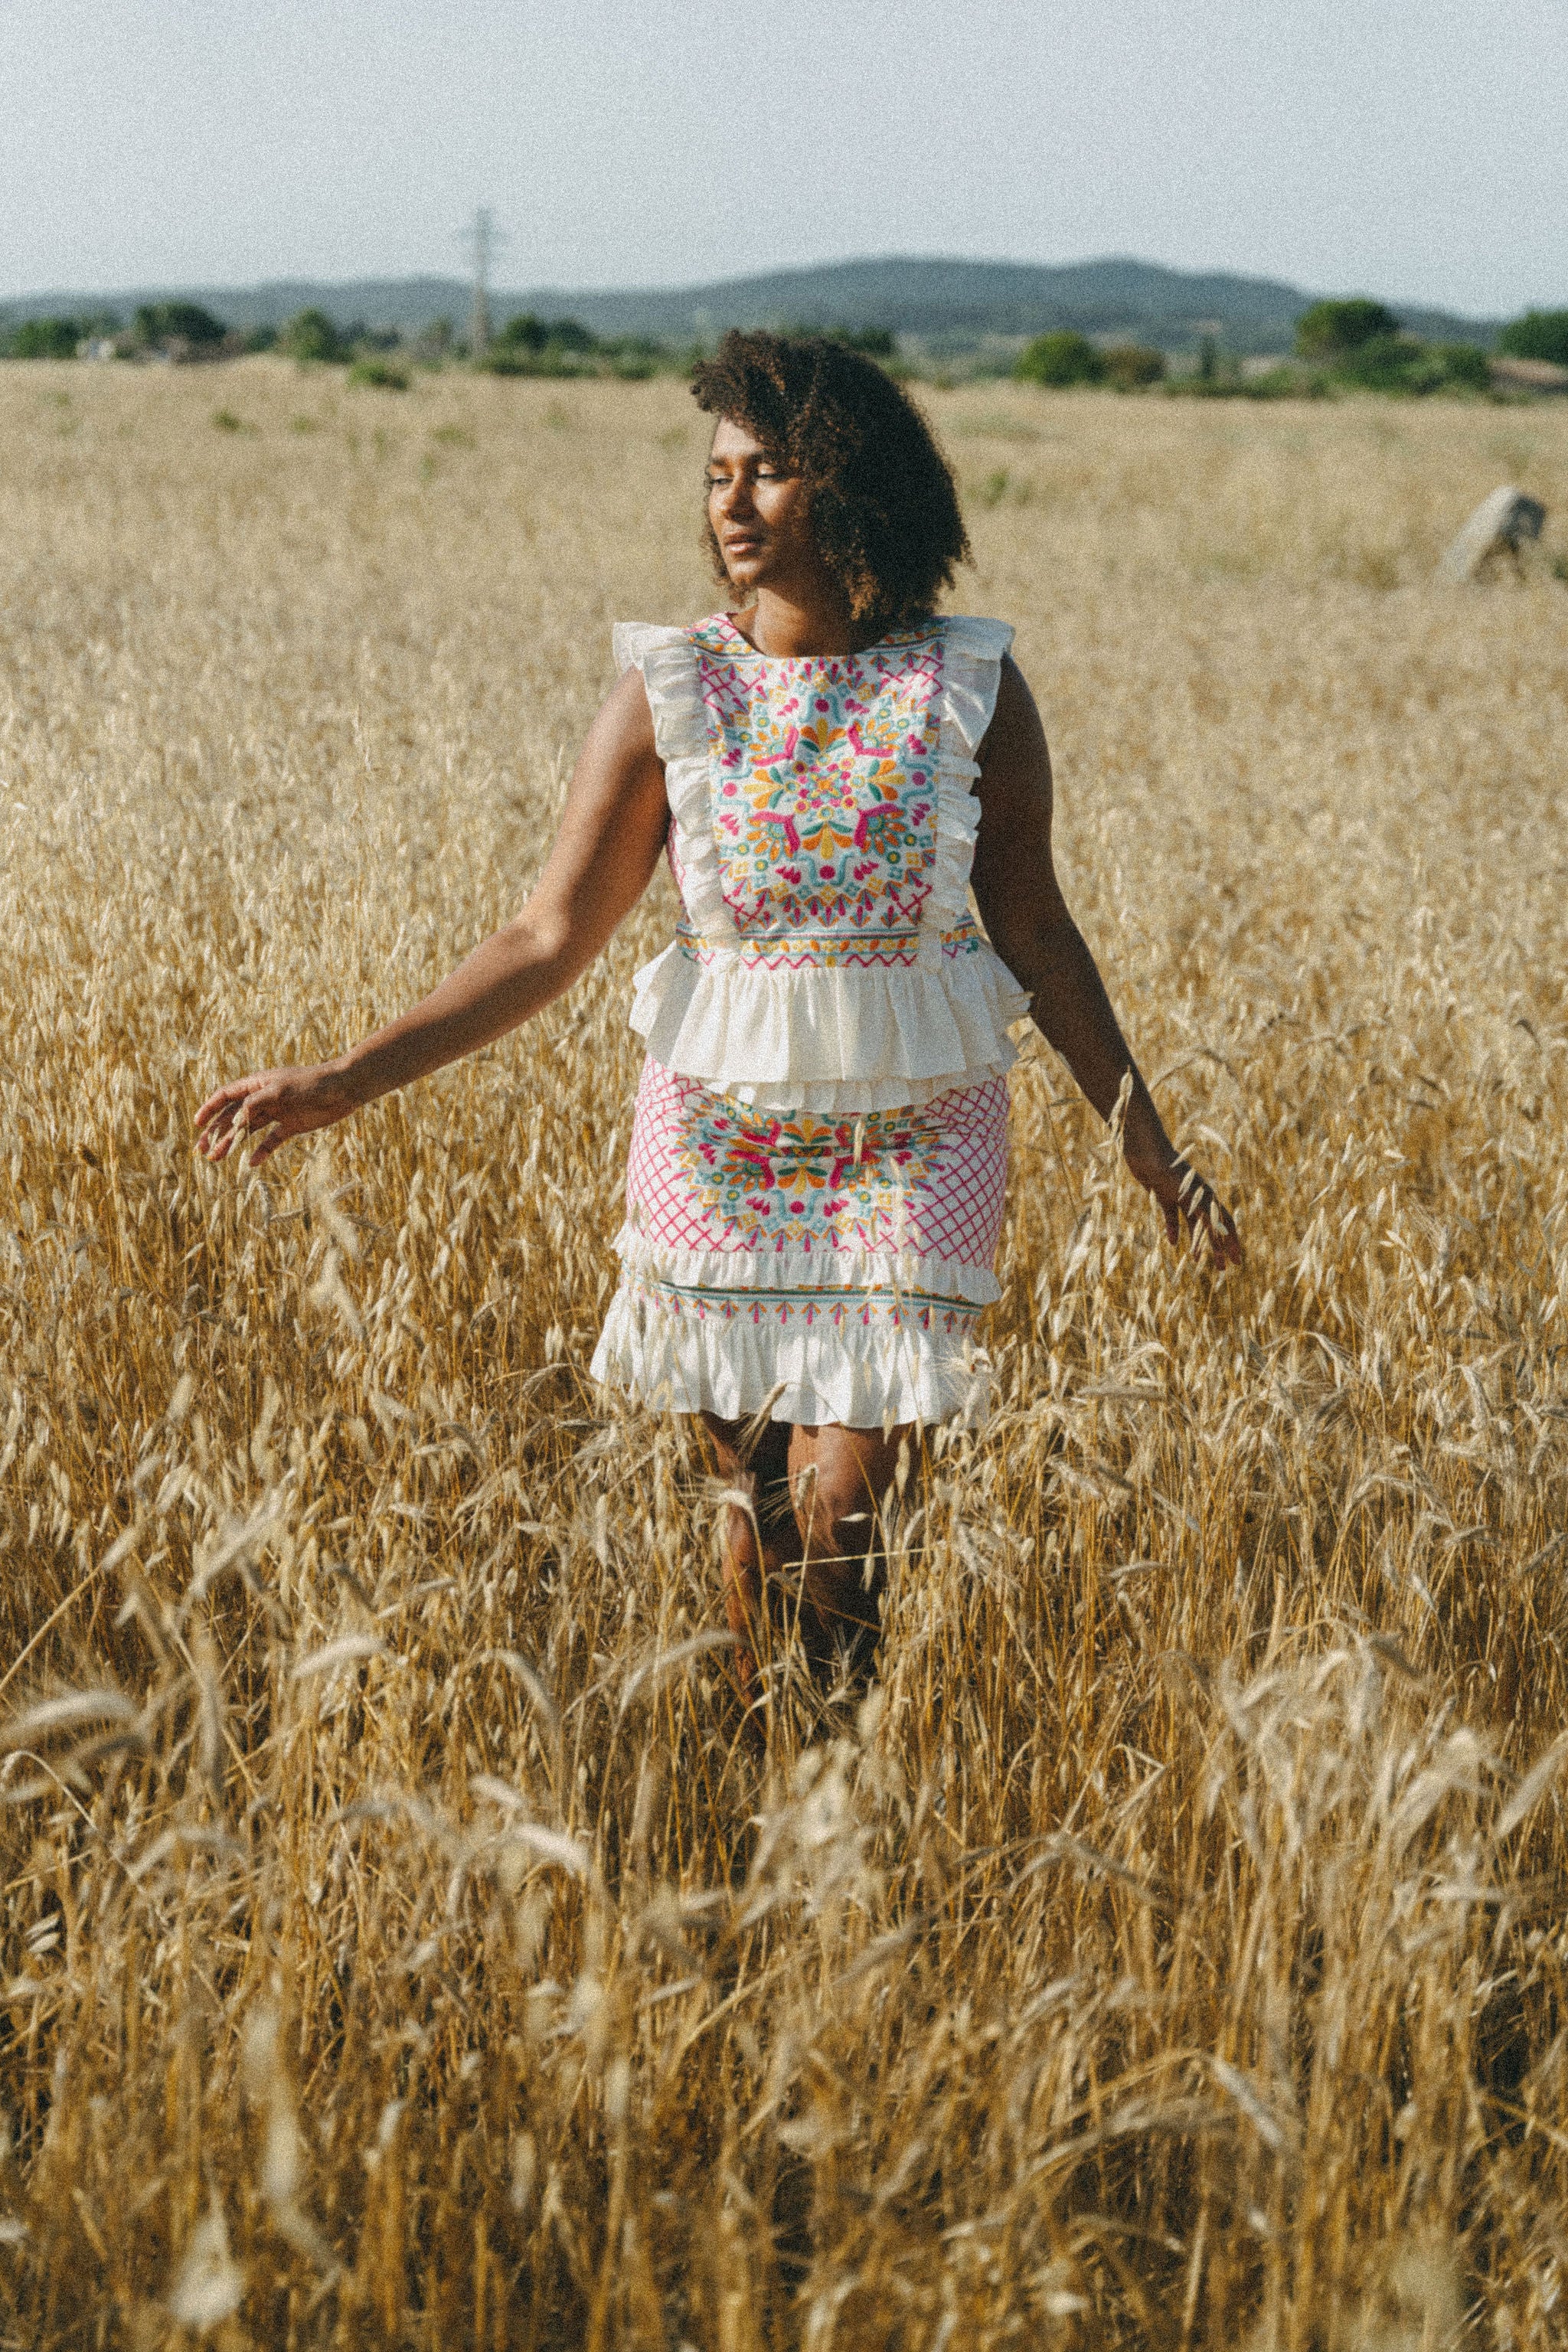 girl in field wearing an embroidered colourful frill top and skirt